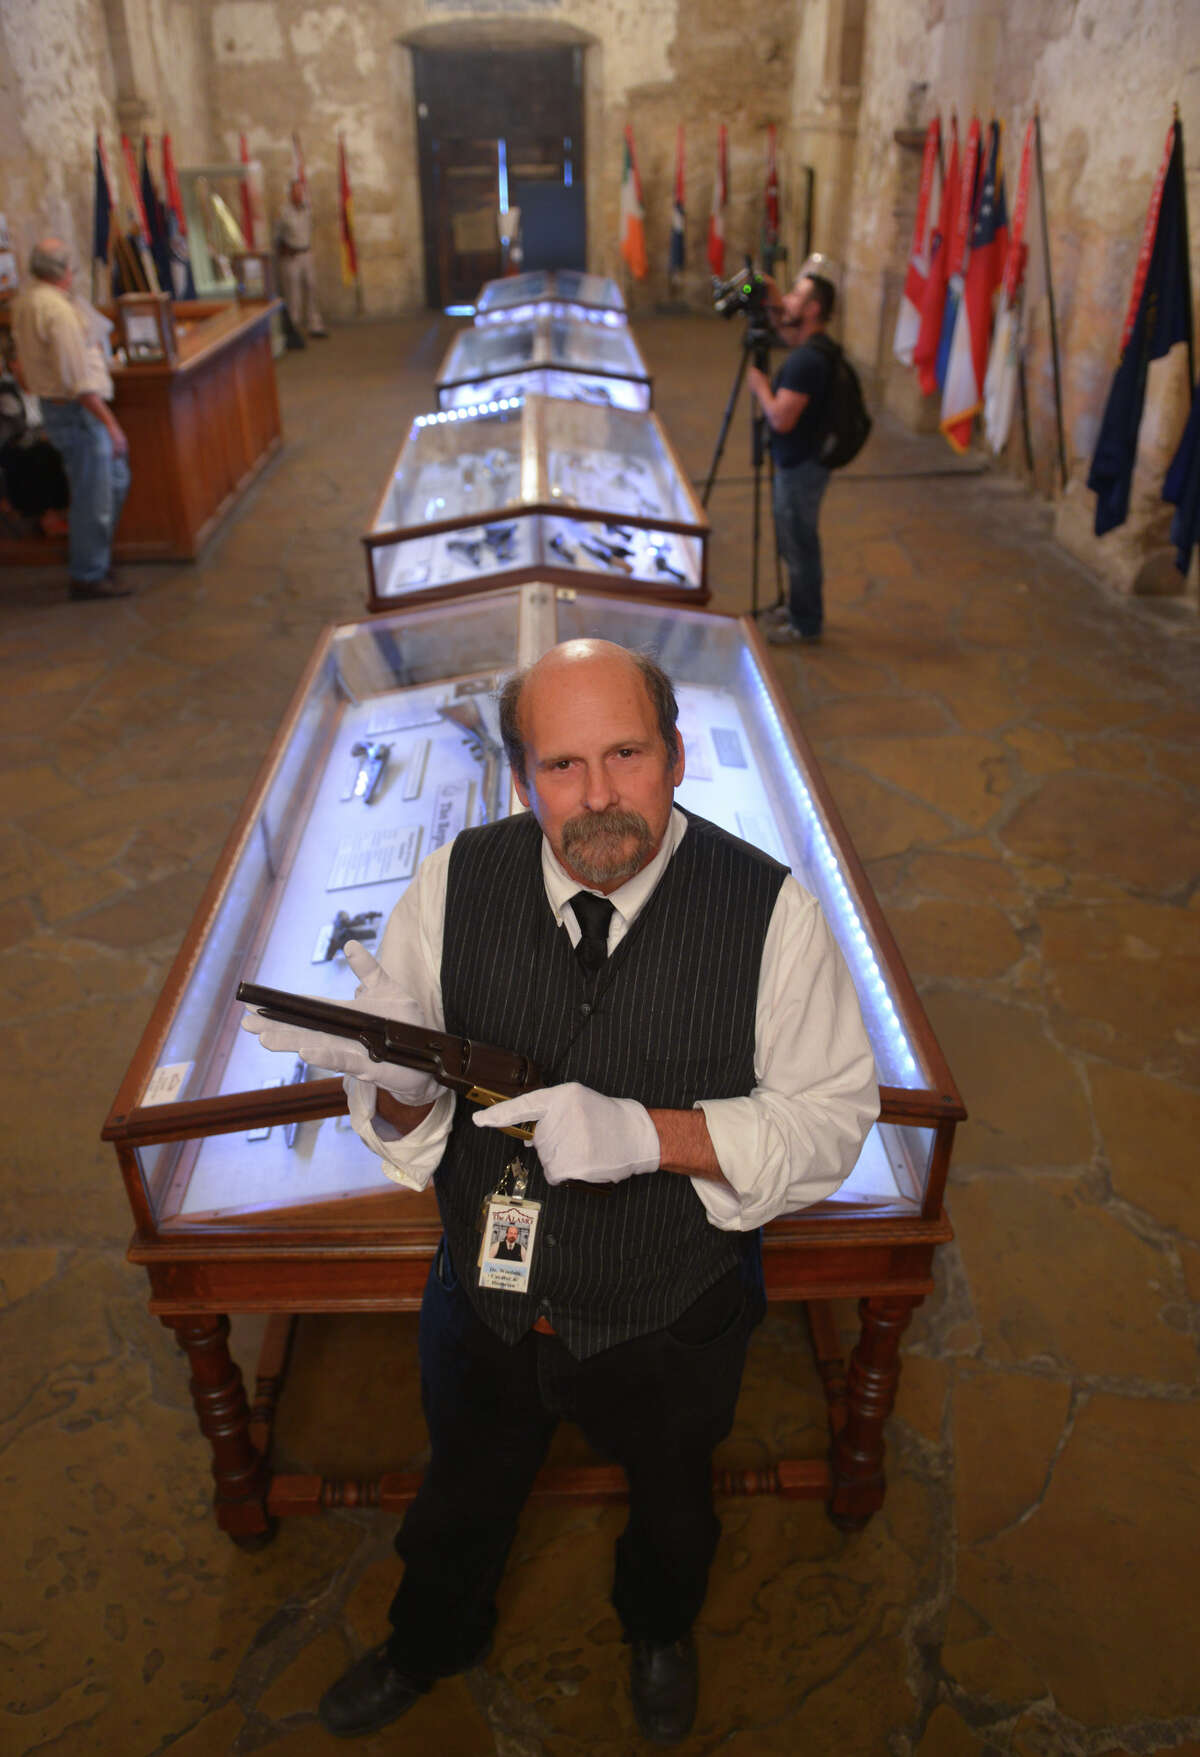 Alamo Historian and Curator Dr. Bruce Winders displays the "Firearms of the Texas Frontier, Flintlocks to Cartridge (1836-1876) which will be on display in the Alamo Shrine through April 15, 2015. He is holding a Colt Walker pistol.